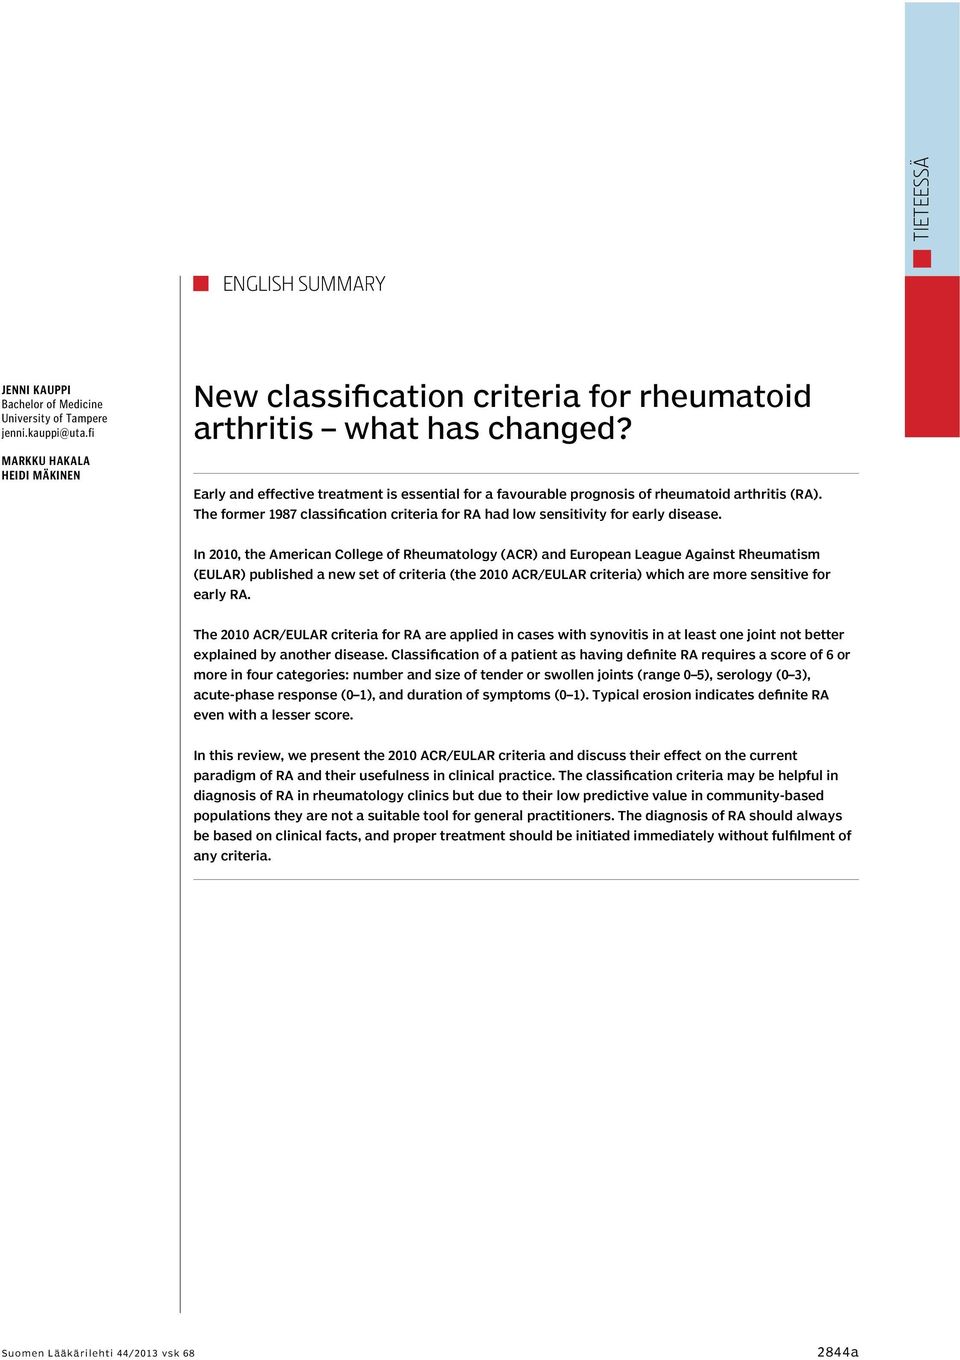 In 2010, the American College of Rheumatology (ACR) and European League Against Rheumatism (EULAR) published a new set of criteria (the 2010 ACR/EULAR criteria) which are more sensitive for early RA.